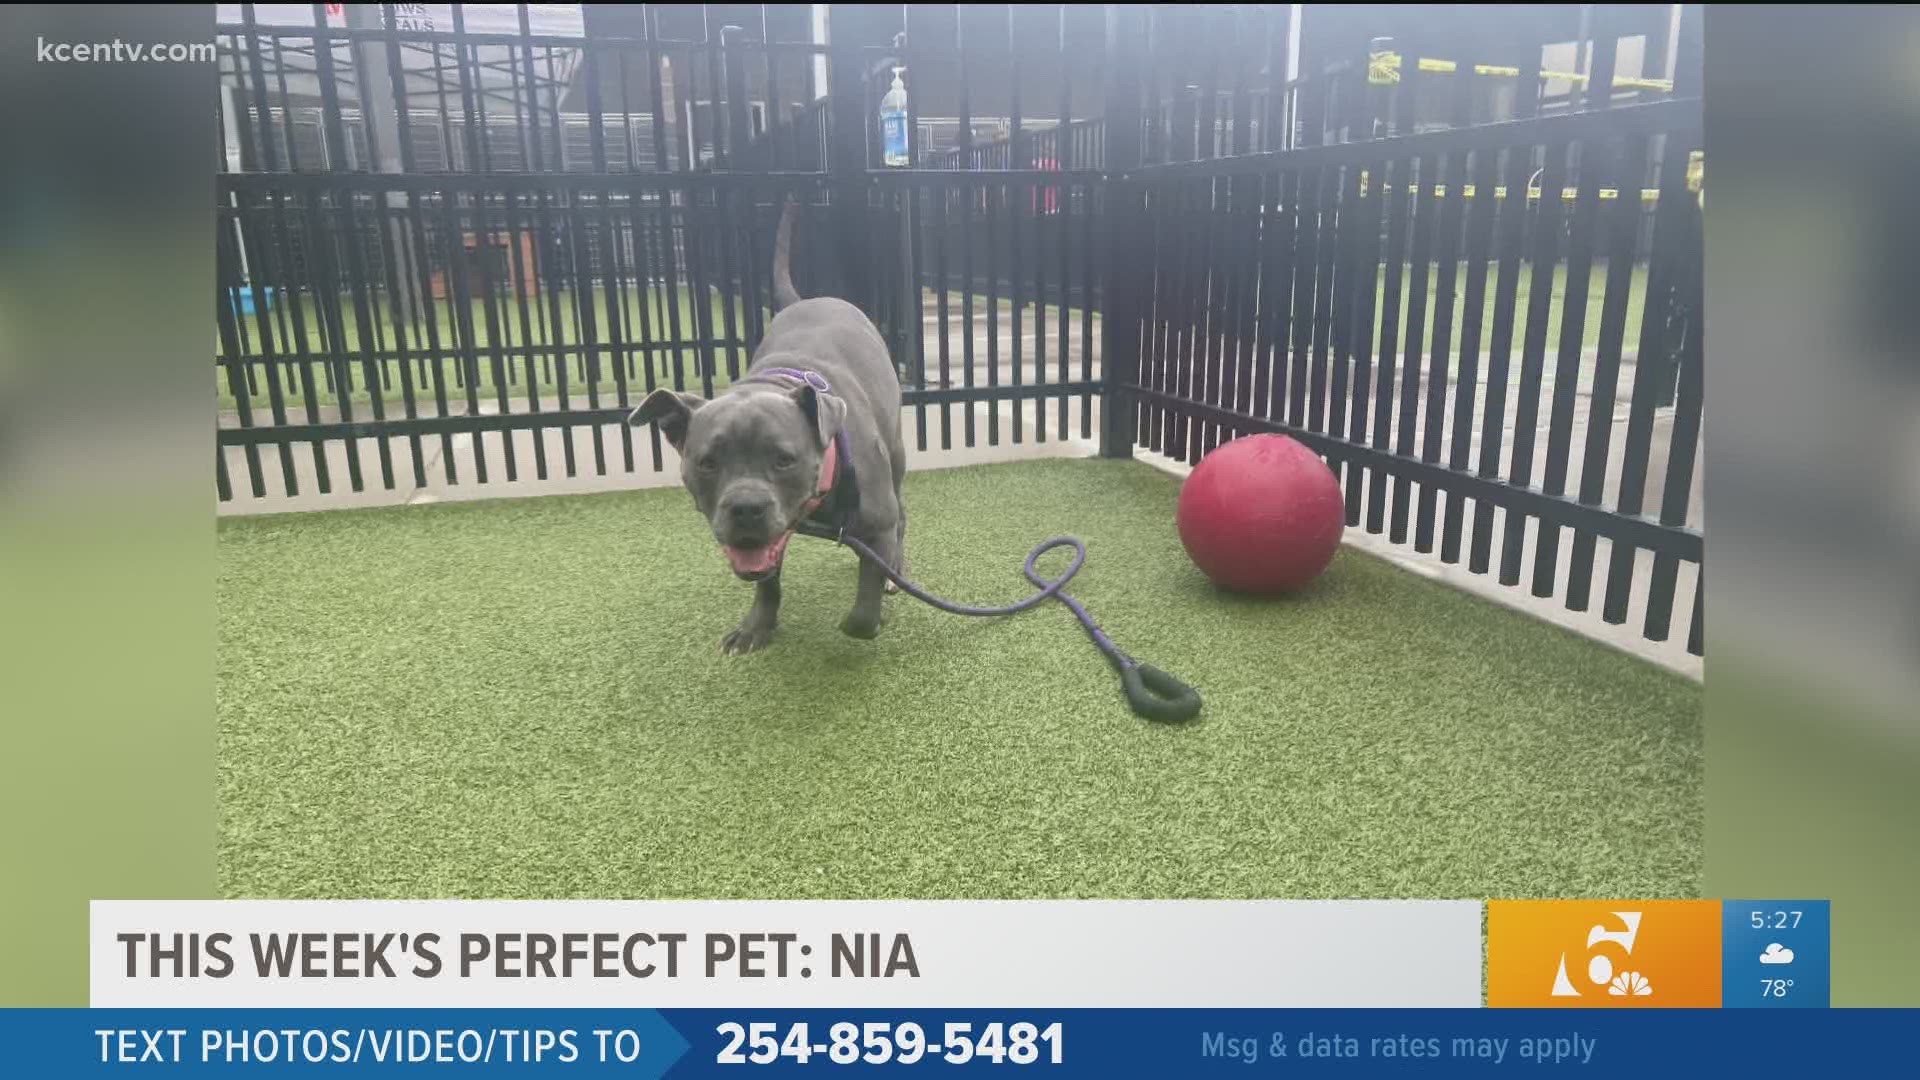 This week's perfect pet is Nia.